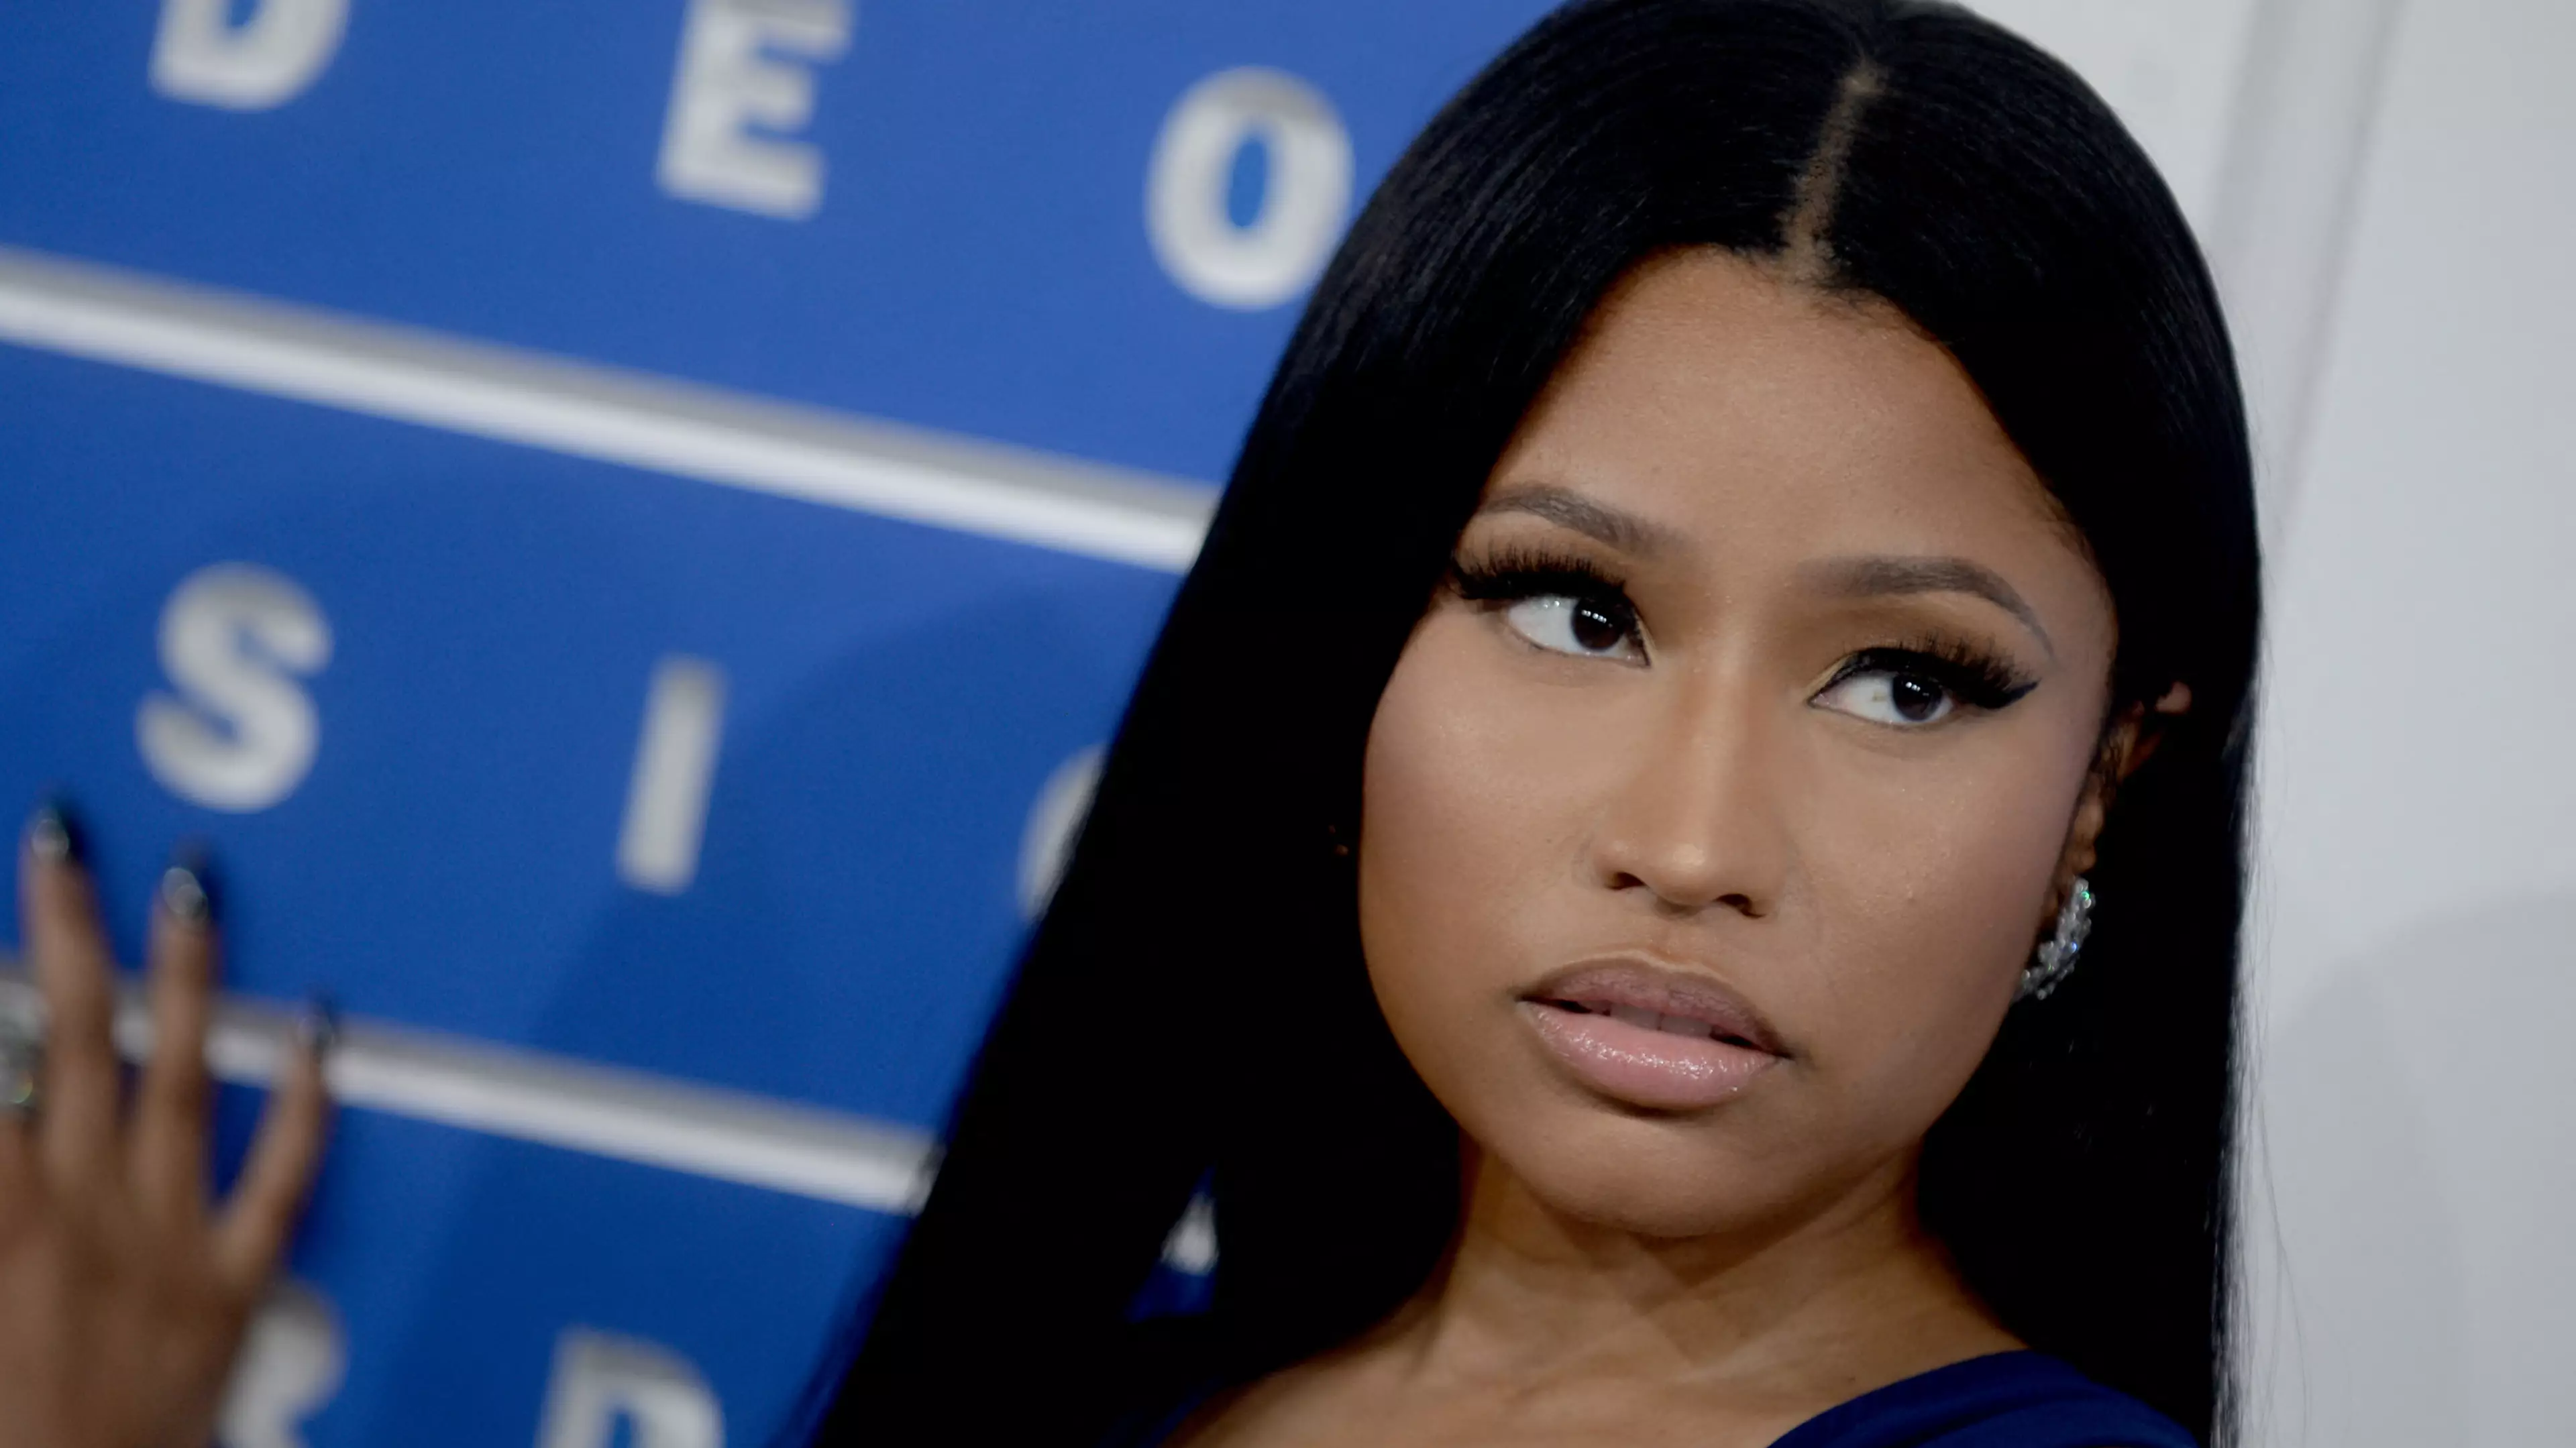 Western Sydney Health Fact Checked Nicki Minaj For Her Cousin’s Friend’s Swollen Testicles